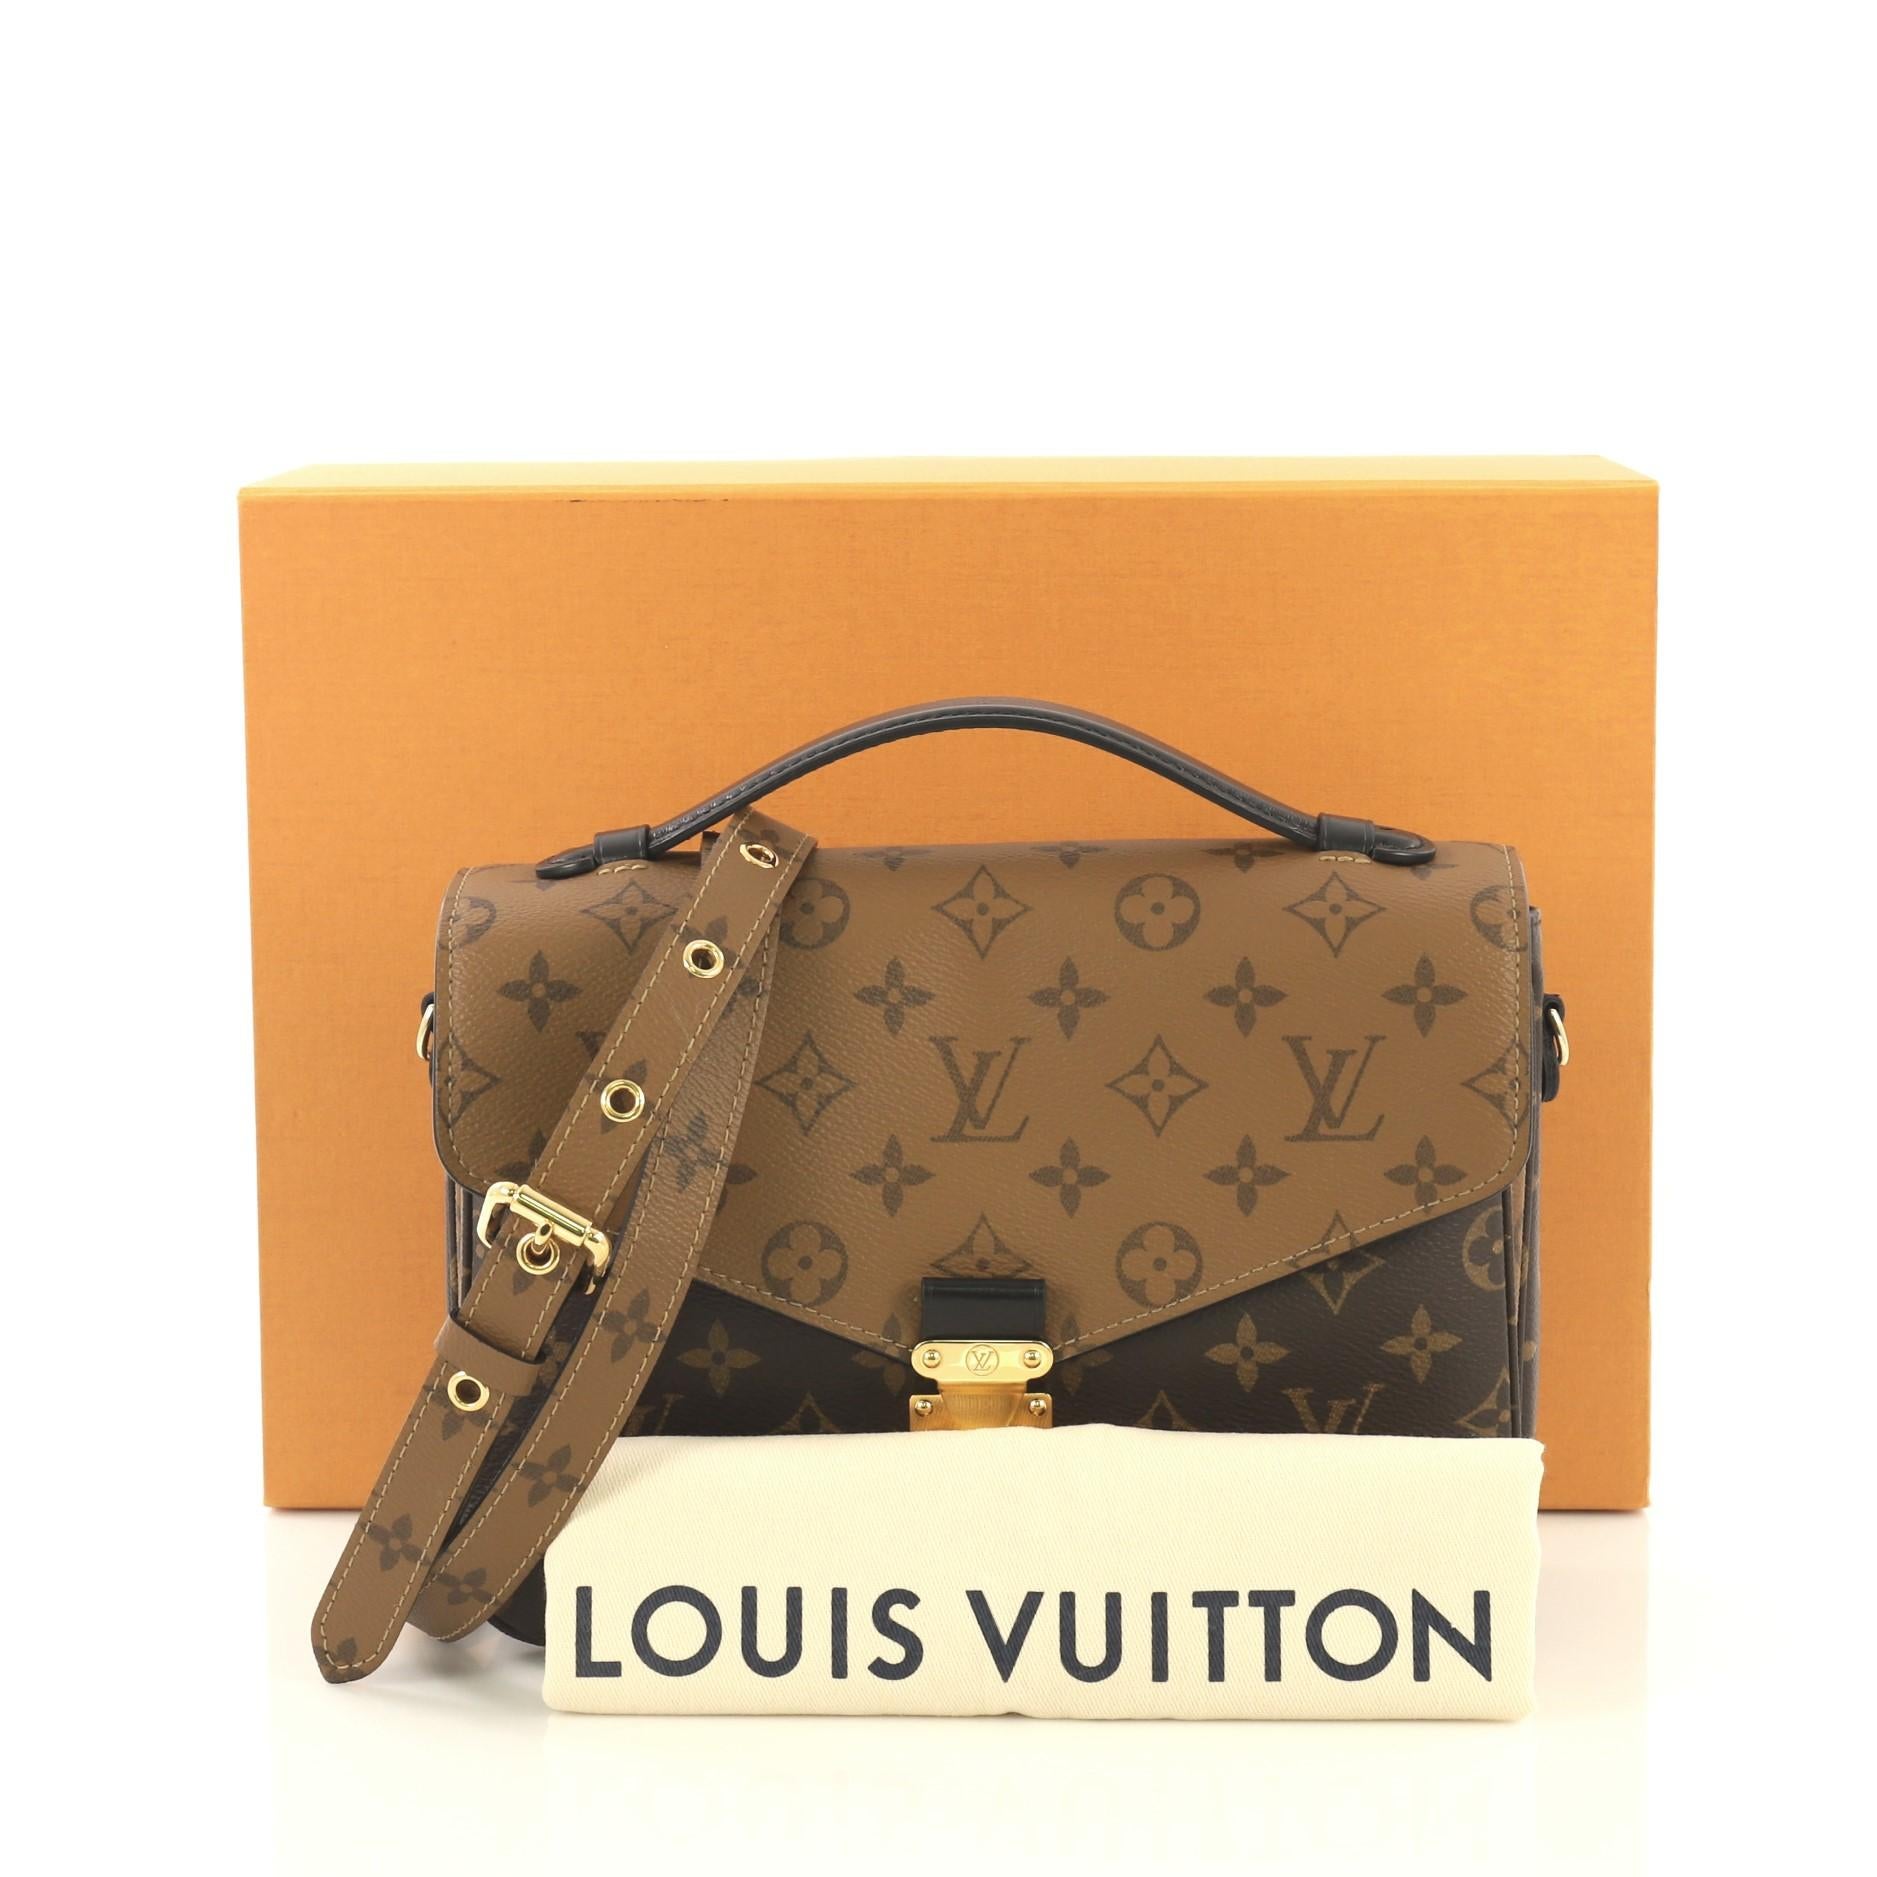 This Louis Vuitton Pochette Metis Reverse Monogram Canvas, crafted from brown reverse monogram coated canvas, features a top leather handle, exterior back zip pocket, and gold-tone hardware. Its S-lock closure opens to a black microfiber interior